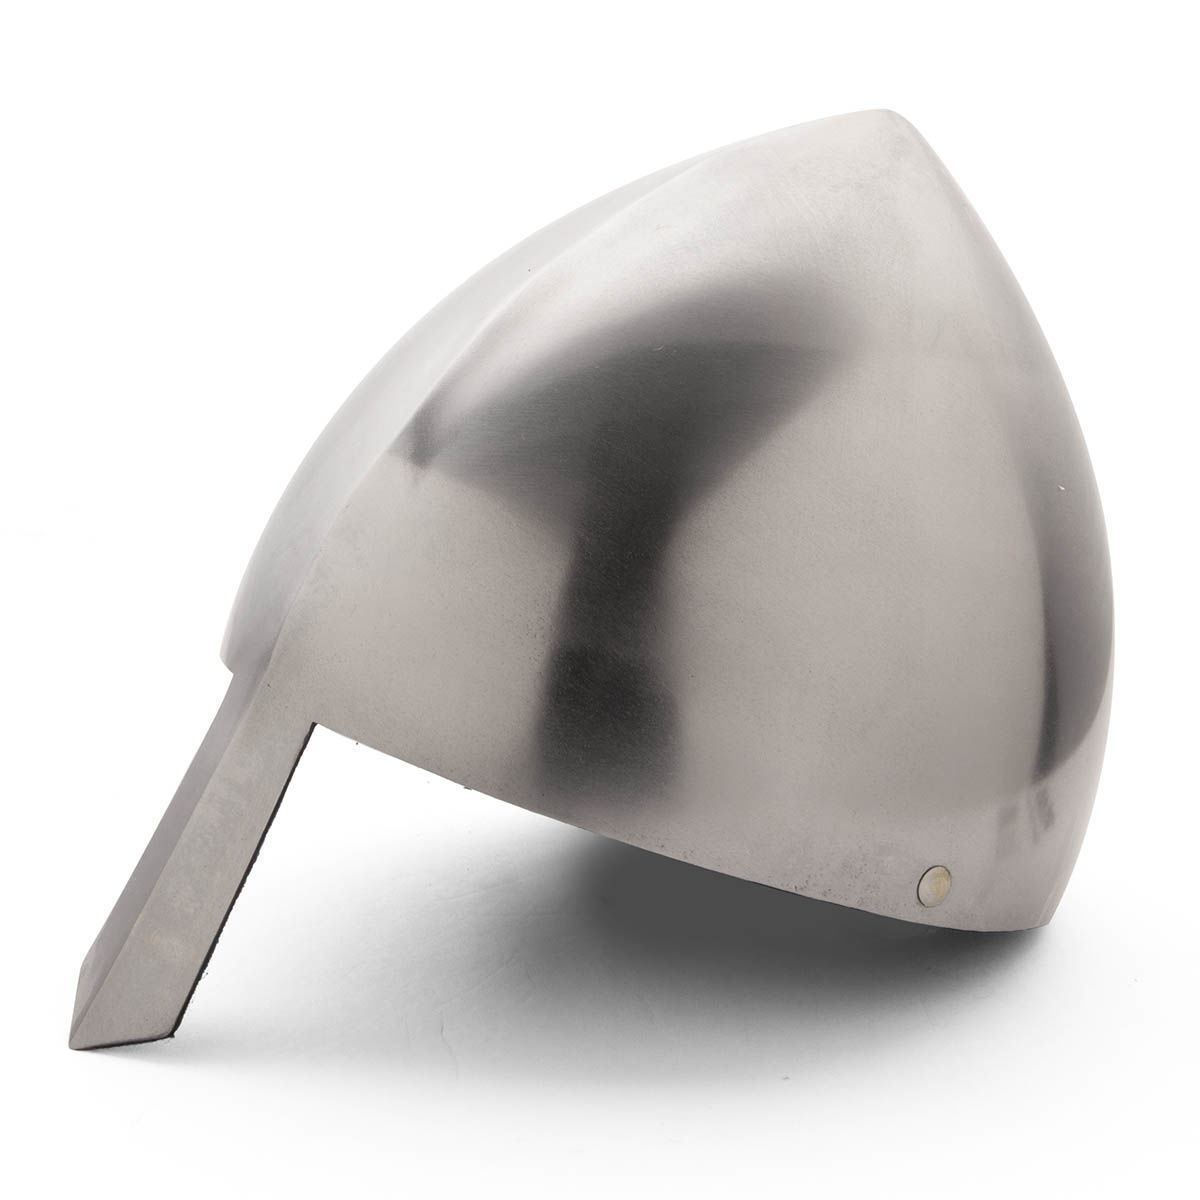 Reproduction medieval Olmutz nasal helmet made of 18 gauge steel with a classic conical shape and a nose guard